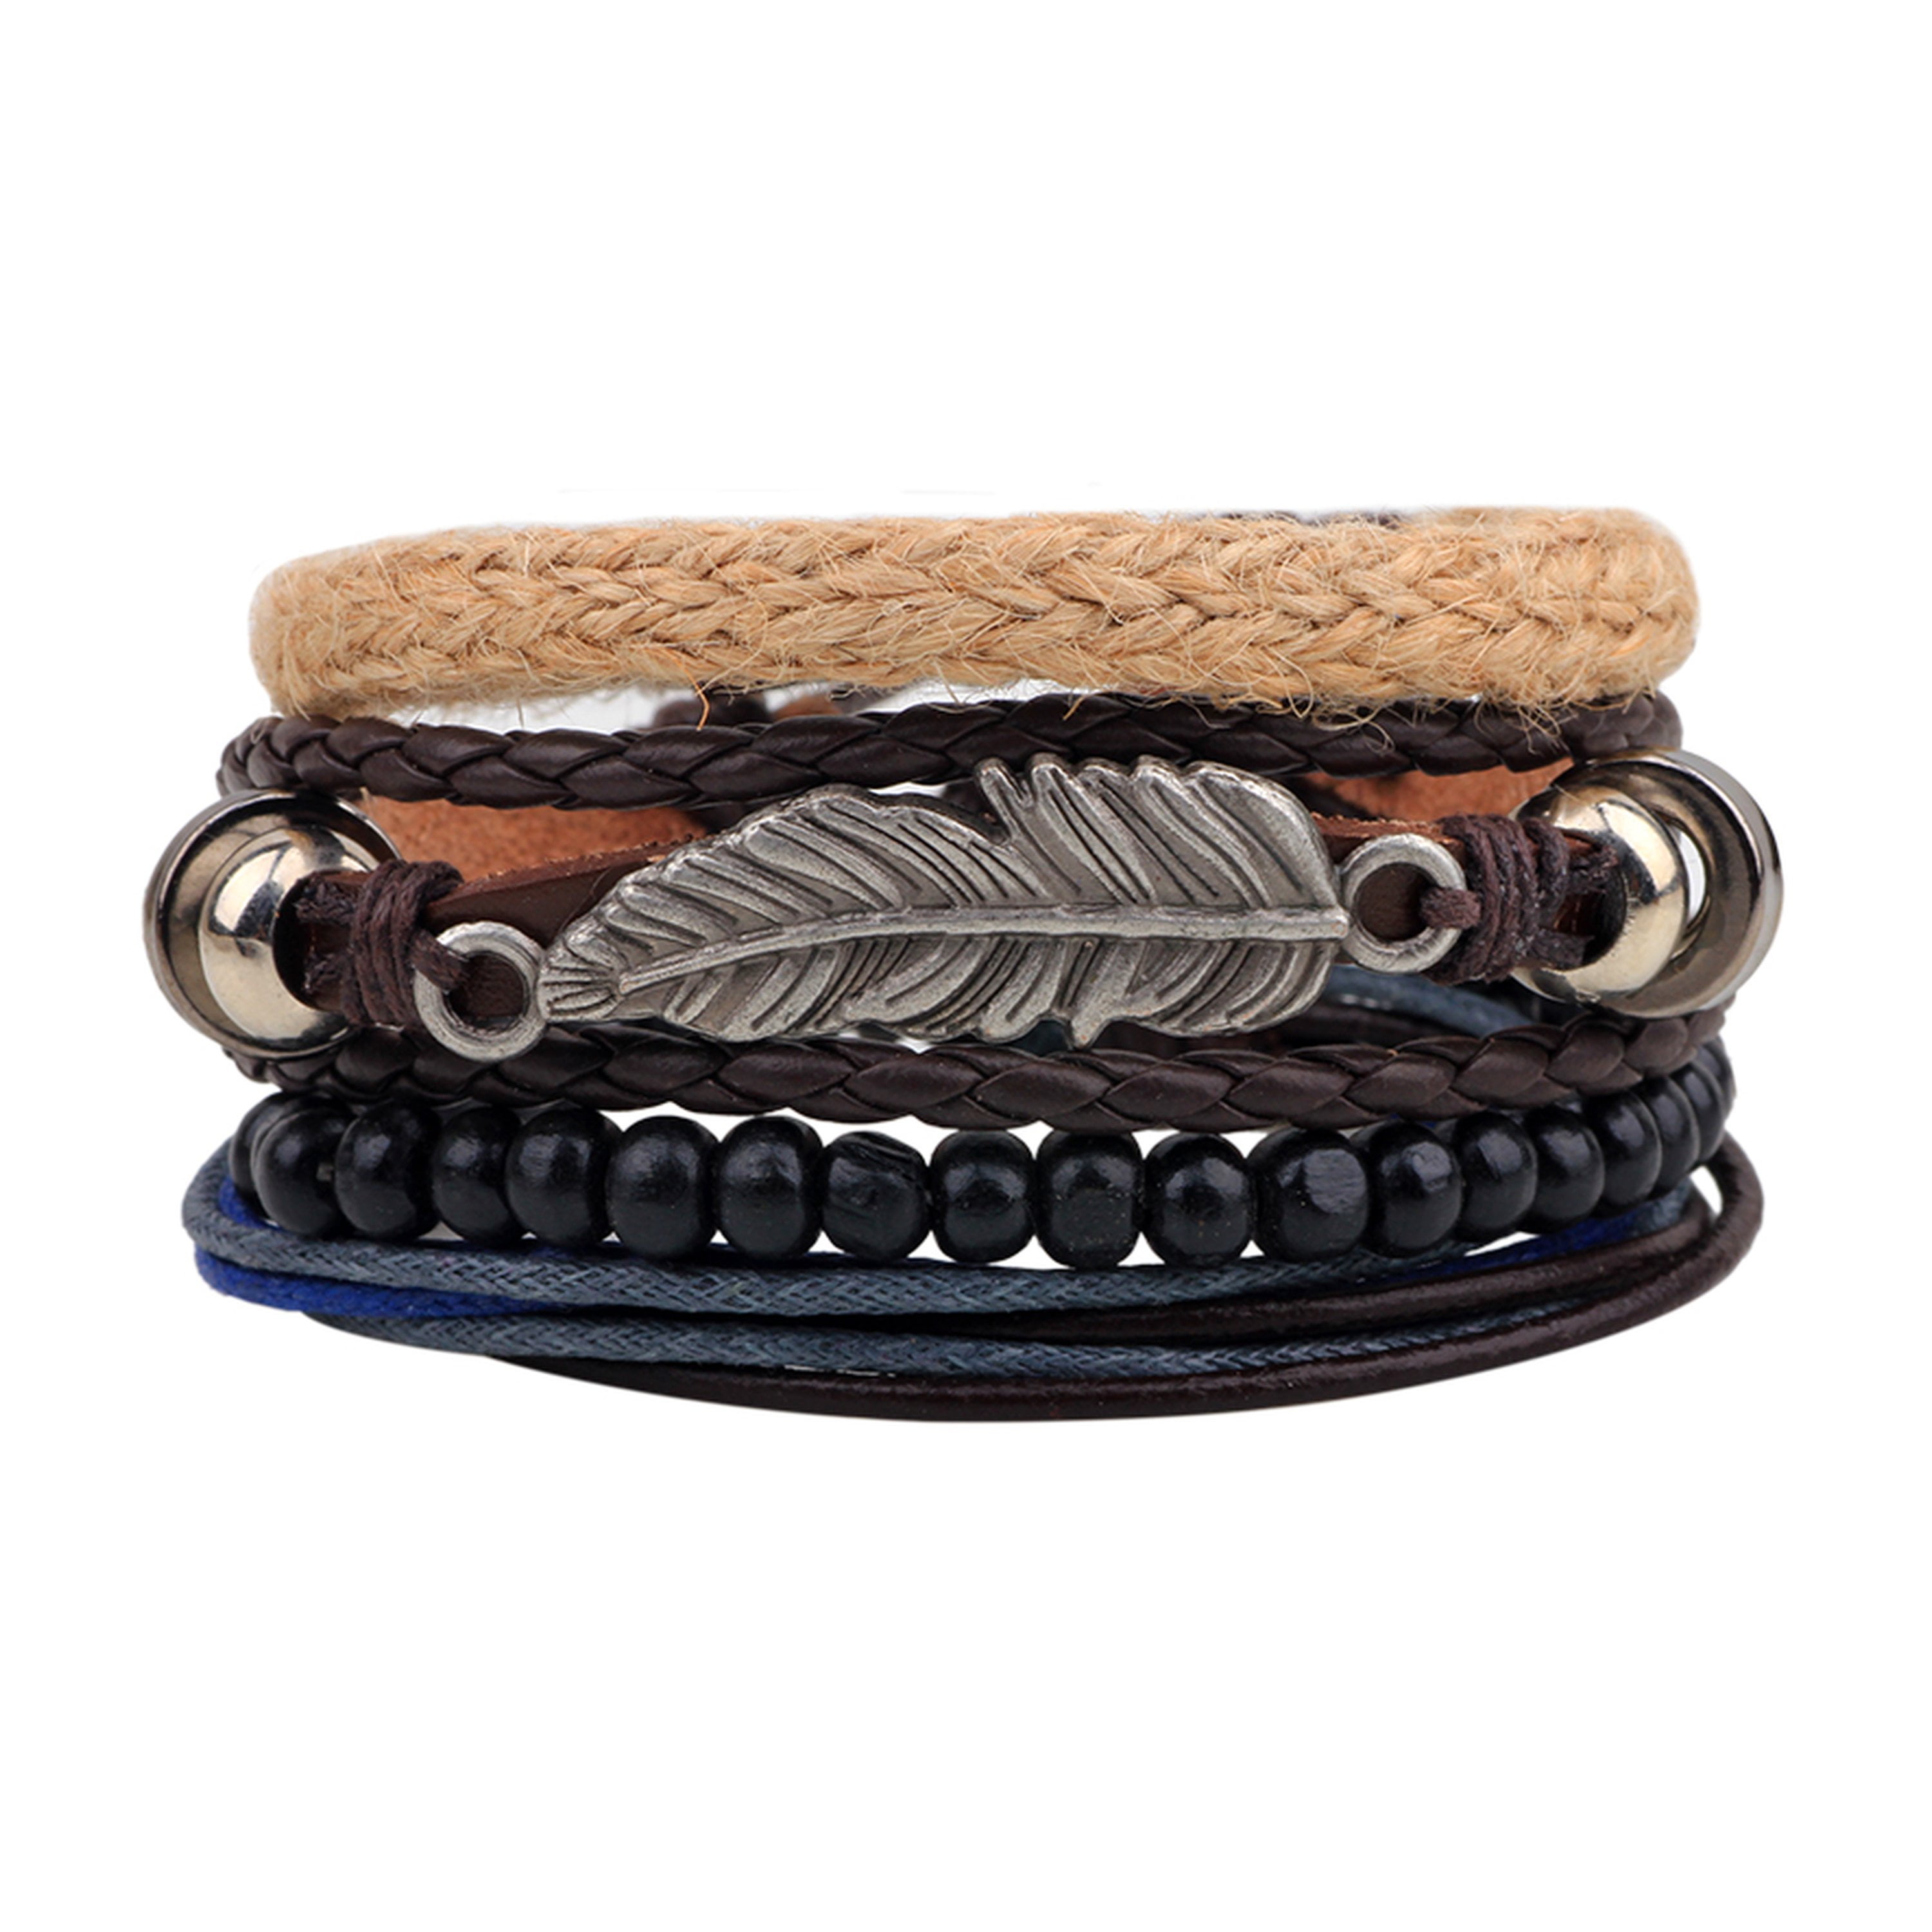 Unisex Tribal Wood Beads and Metal Leaf Leather Wristband Bracelet For ...